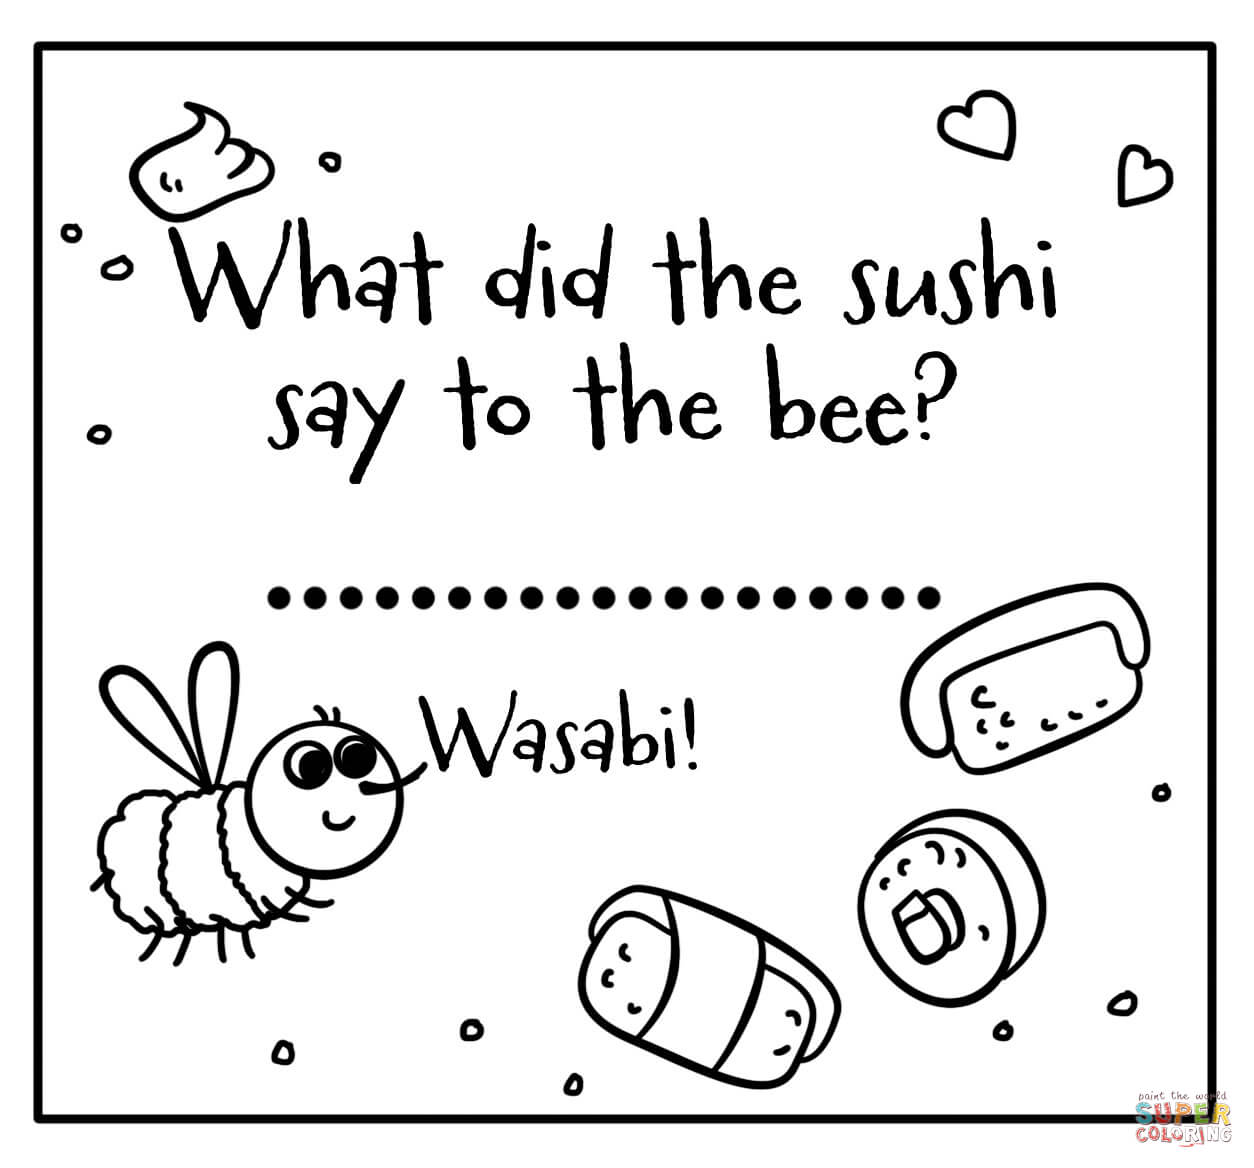 Wasabi - Encouraging Jokes Lunch Note coloring page | Free Printable Coloring  Pages